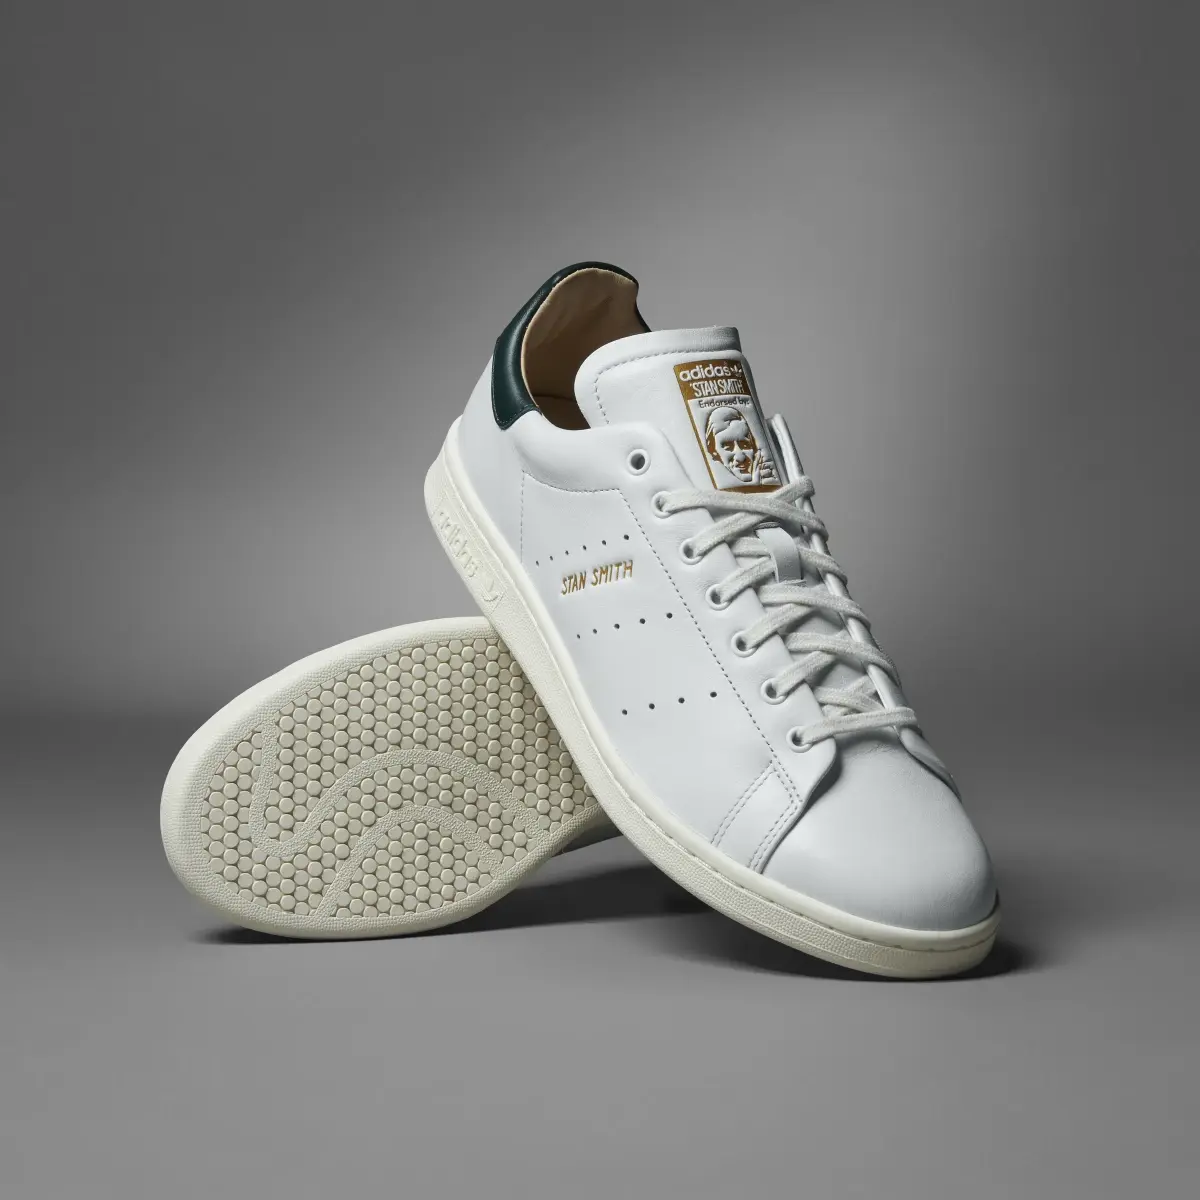 Adidas Stan Smith Lux Shoes. 1